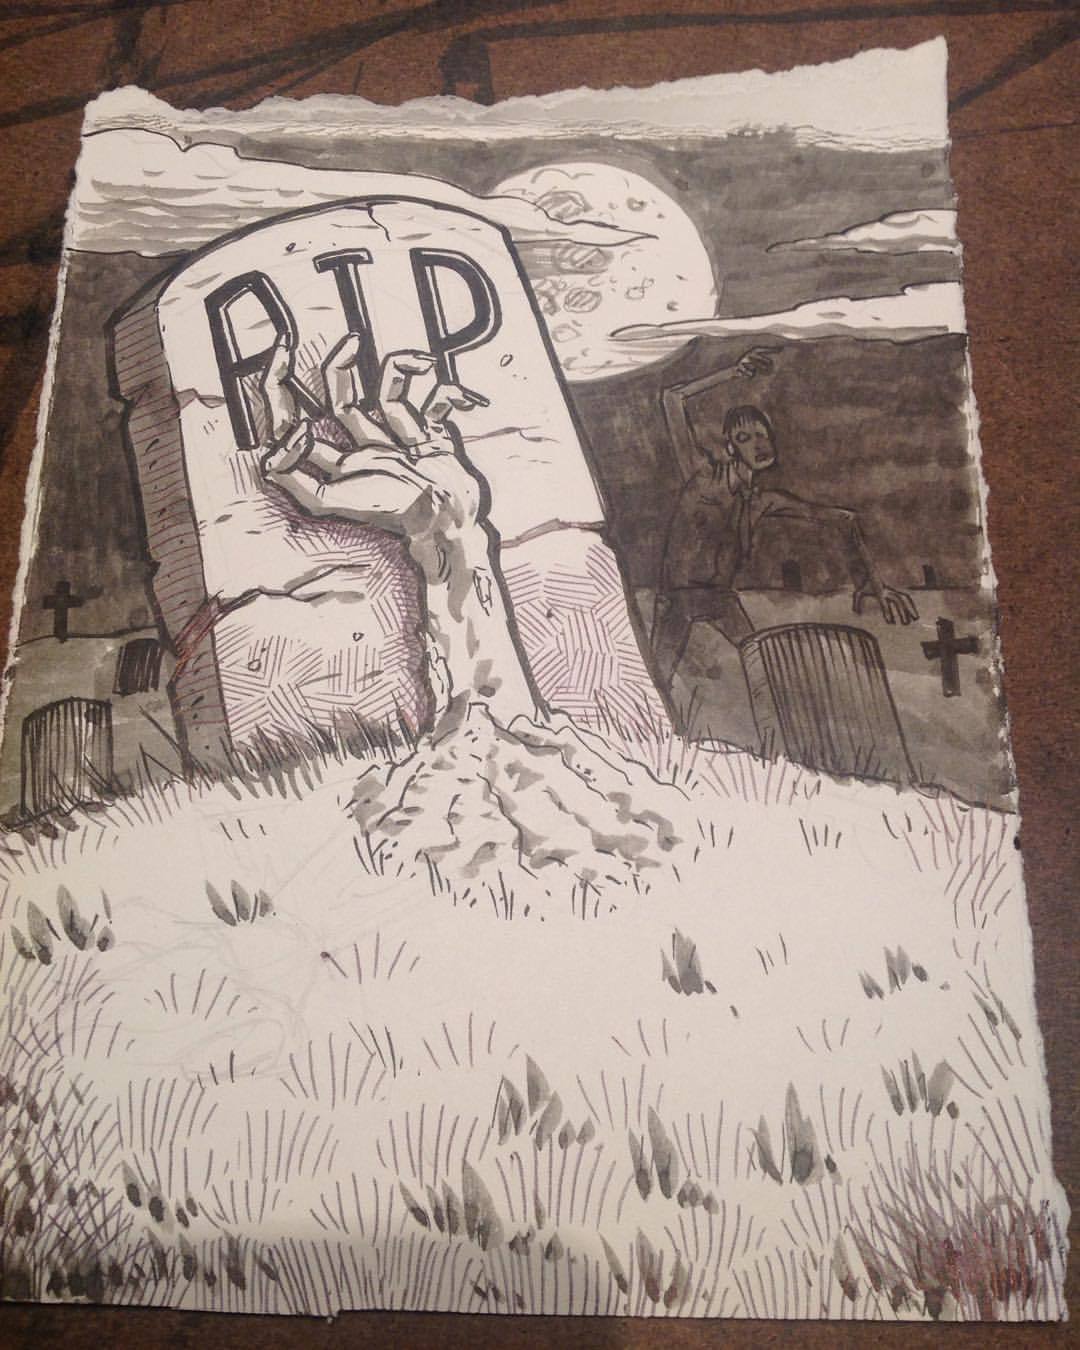 Day 16 of #drawlloween a #grave #Cemetary #sketch #sketches #sketchbook #doodle #ink #inkwash  #inktober #halloween #zombie #scary #horror